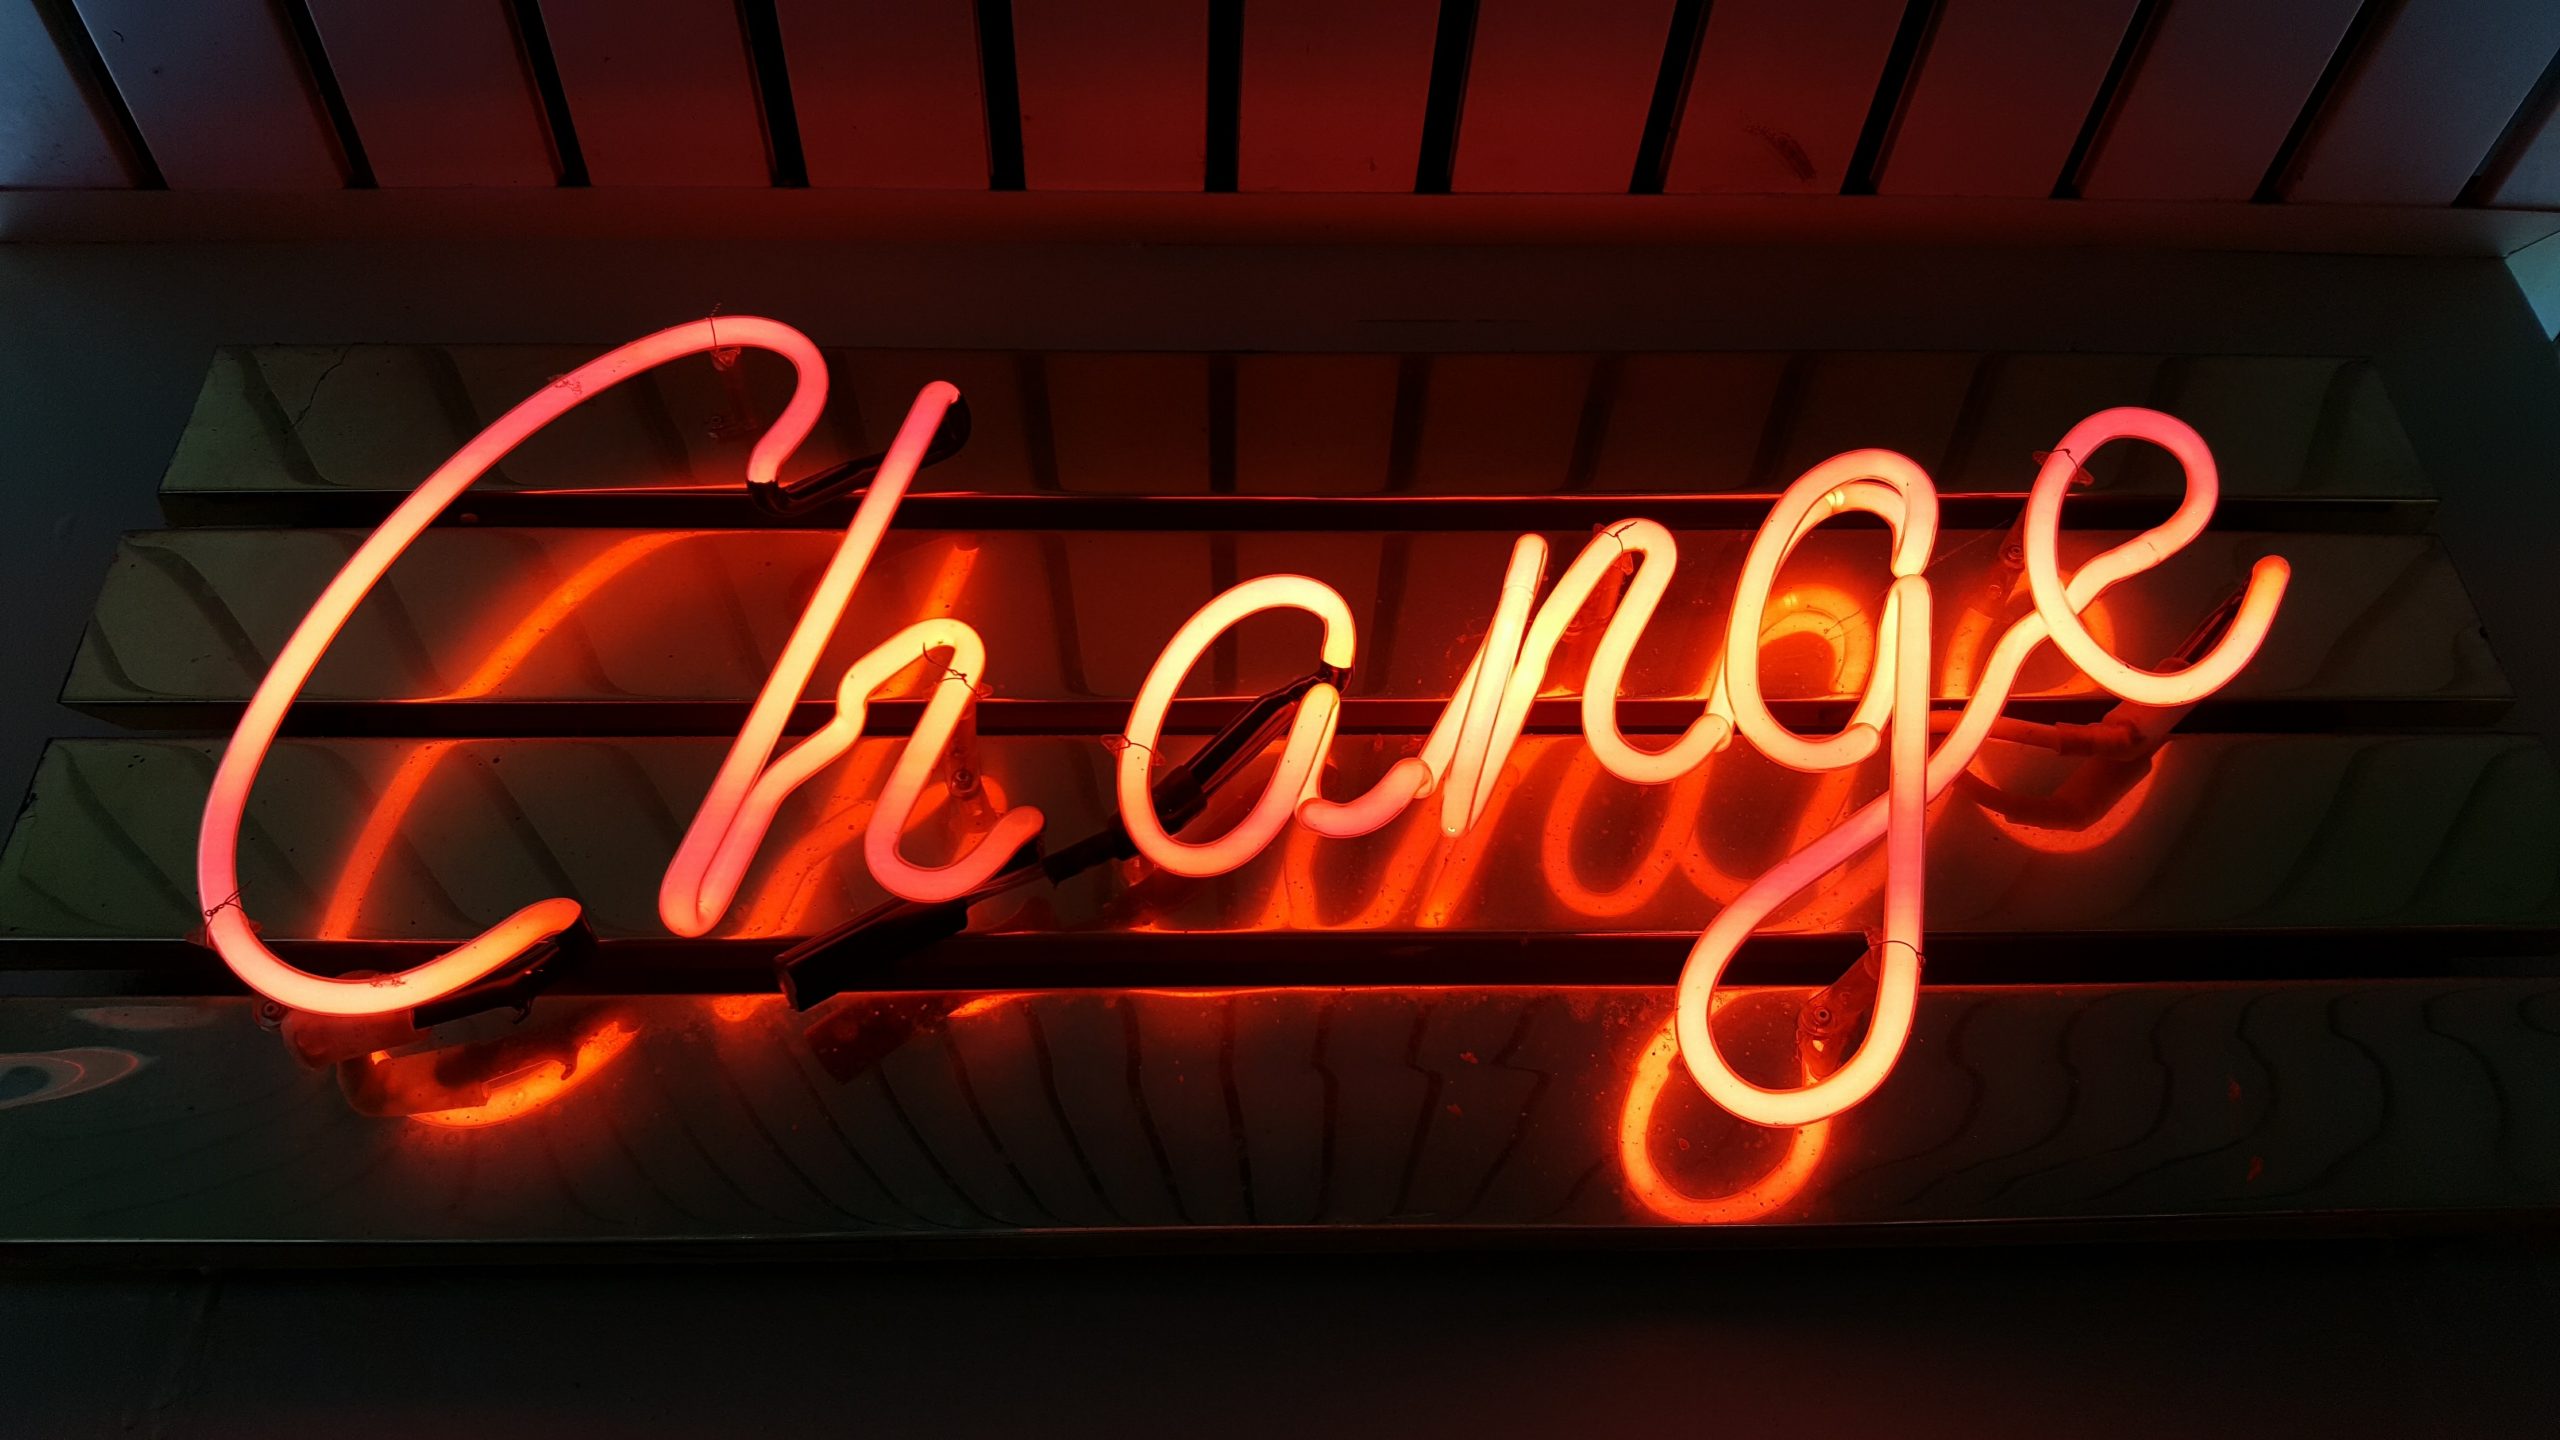 Bright orange neon sign spelling out "Change" with a capital C and then all lower case. Appears to hang from ceiling in dimly lit room.